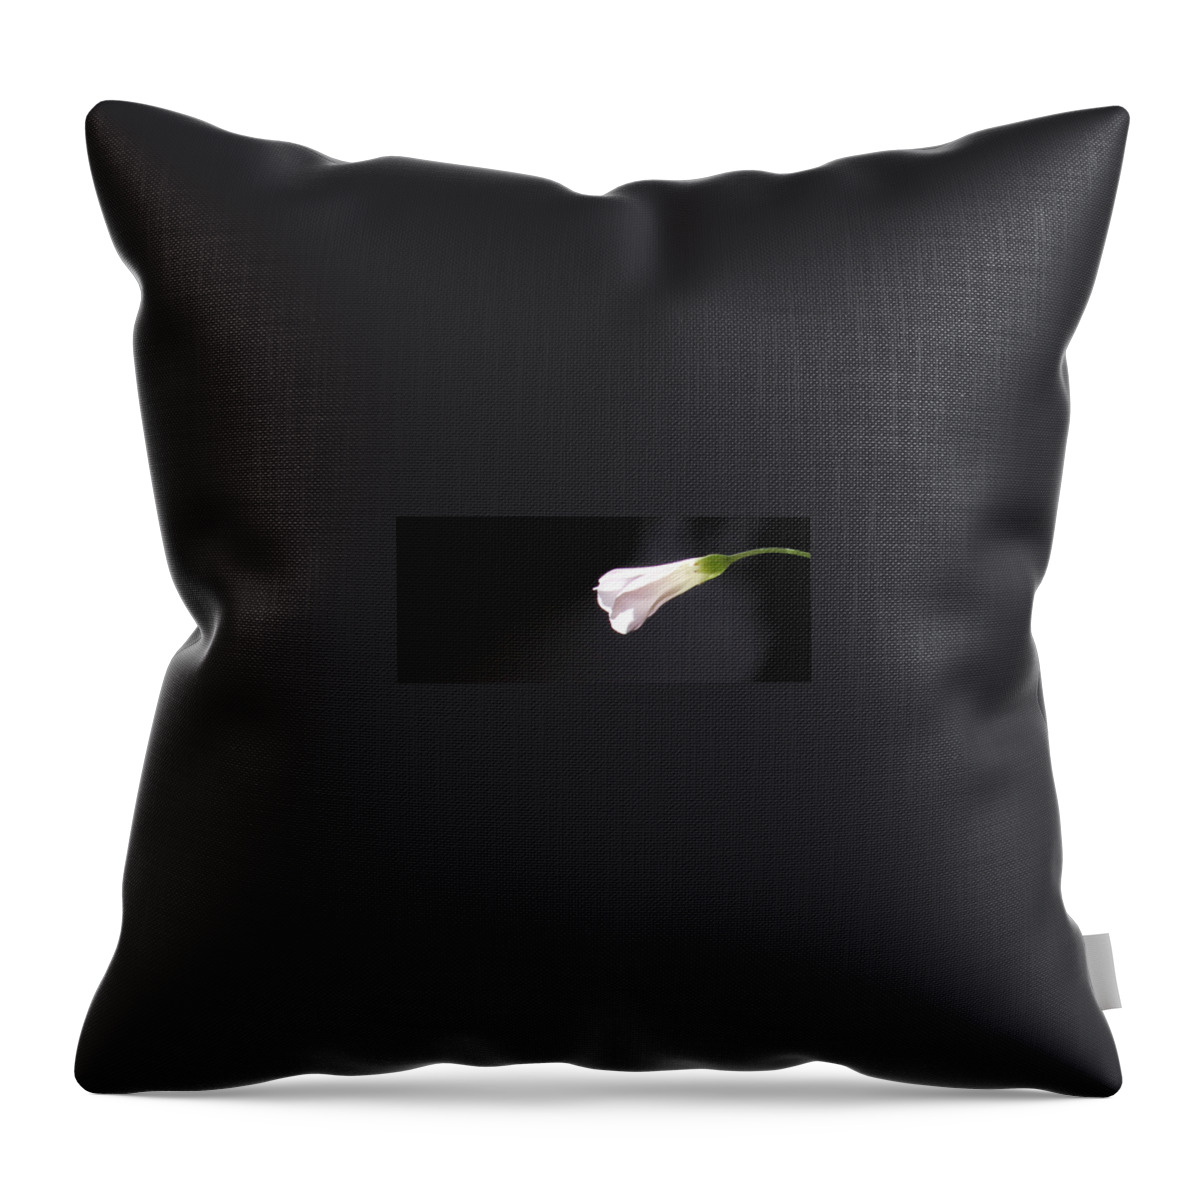 Floral Garden Throw Pillow featuring the photograph Oxalis Bud by Kume Bryant